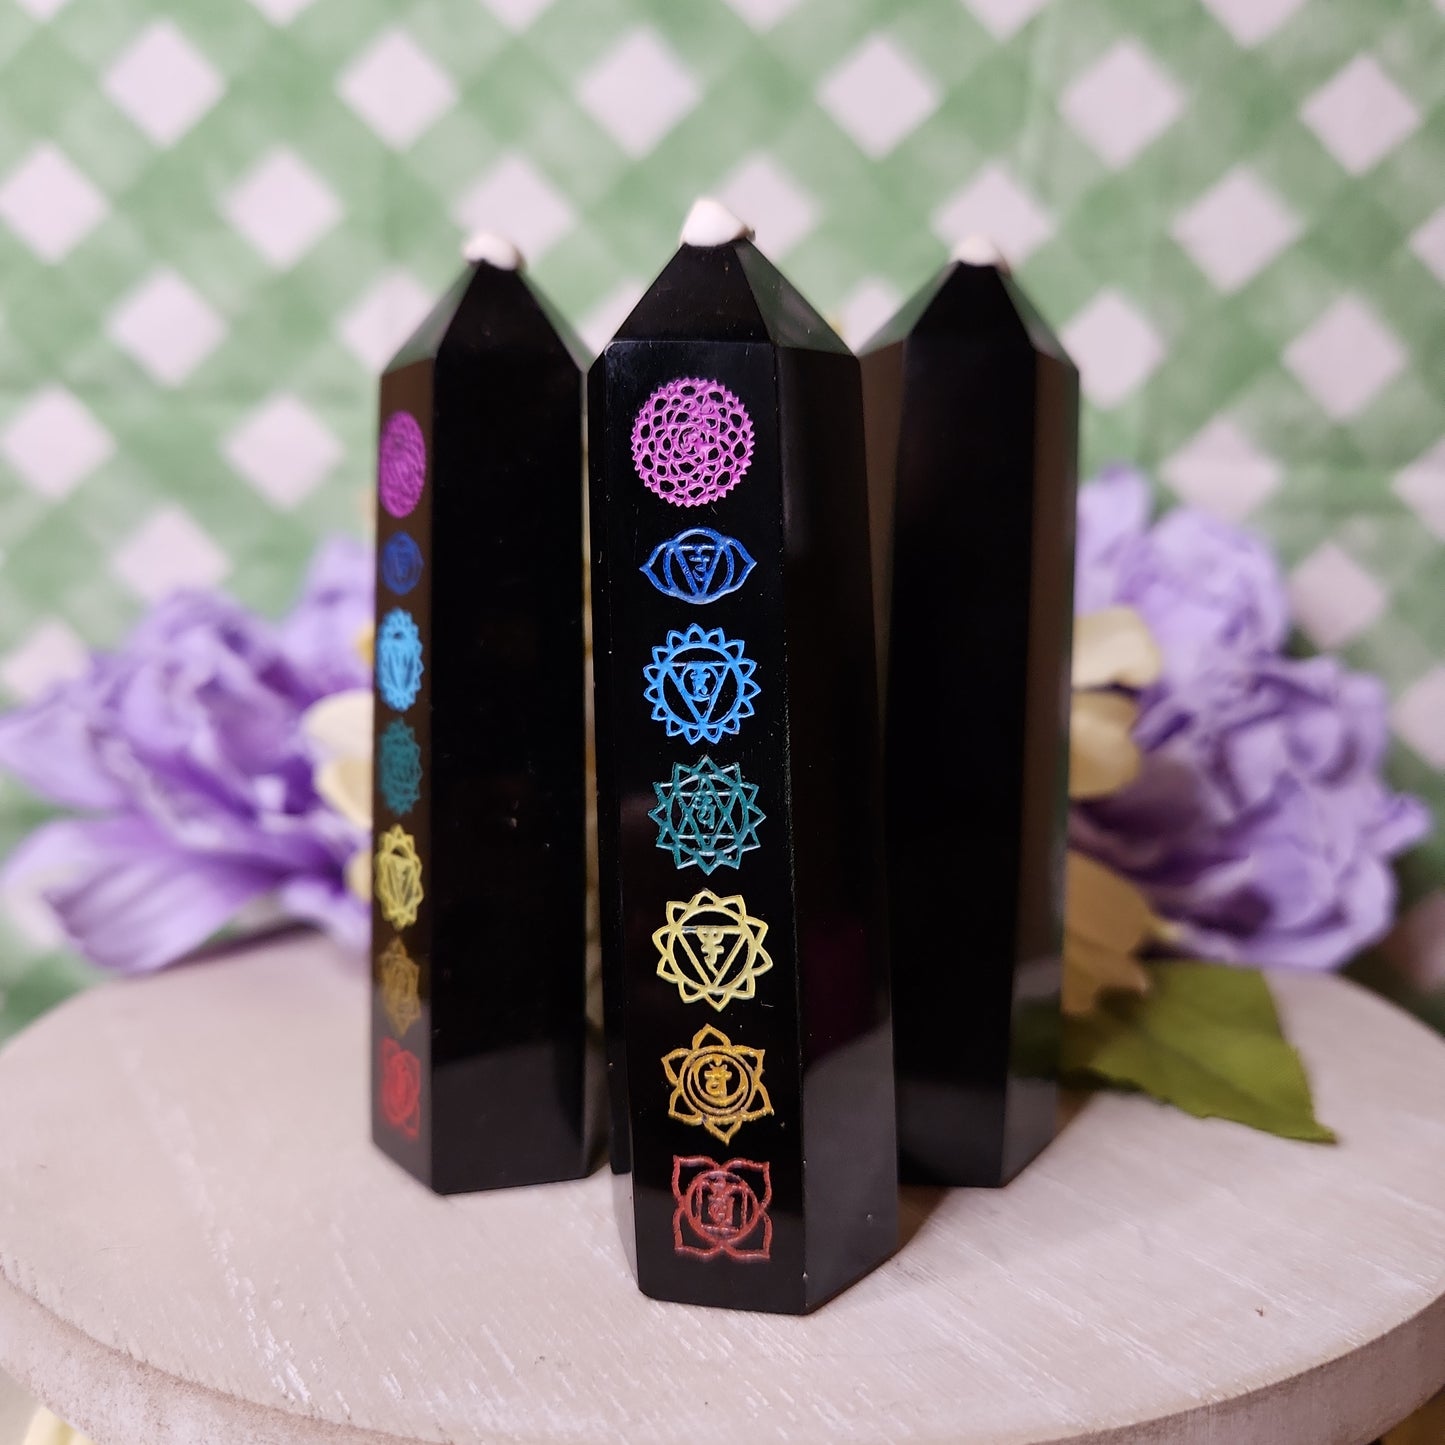 Black obsidian tower with painted chakra symbols